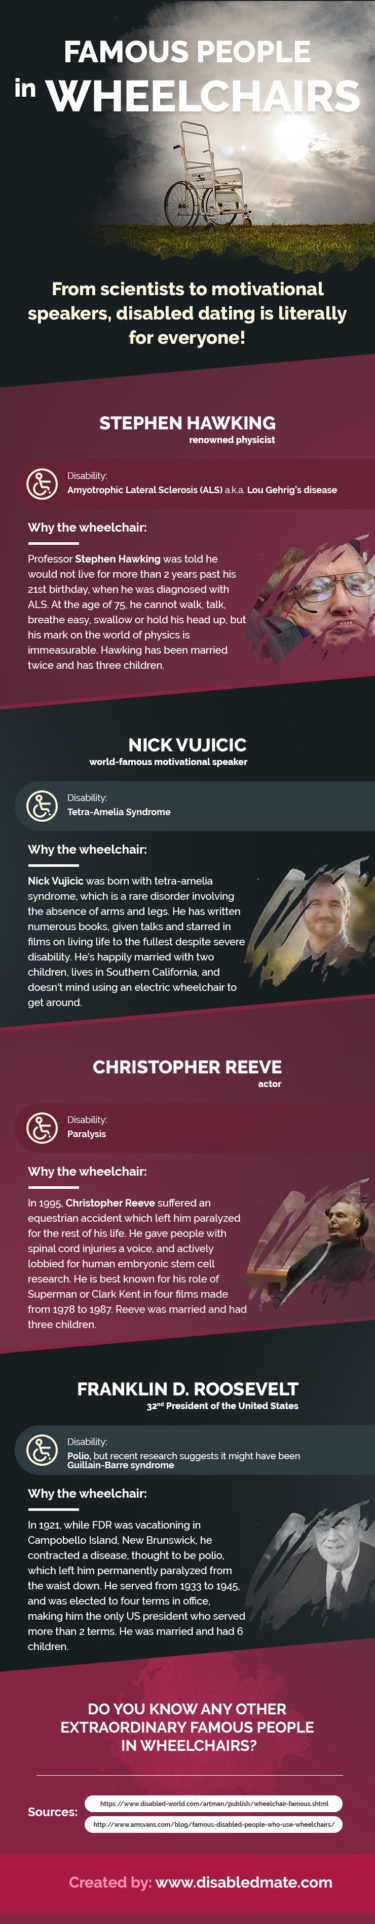 Famous People in Wheelchairs